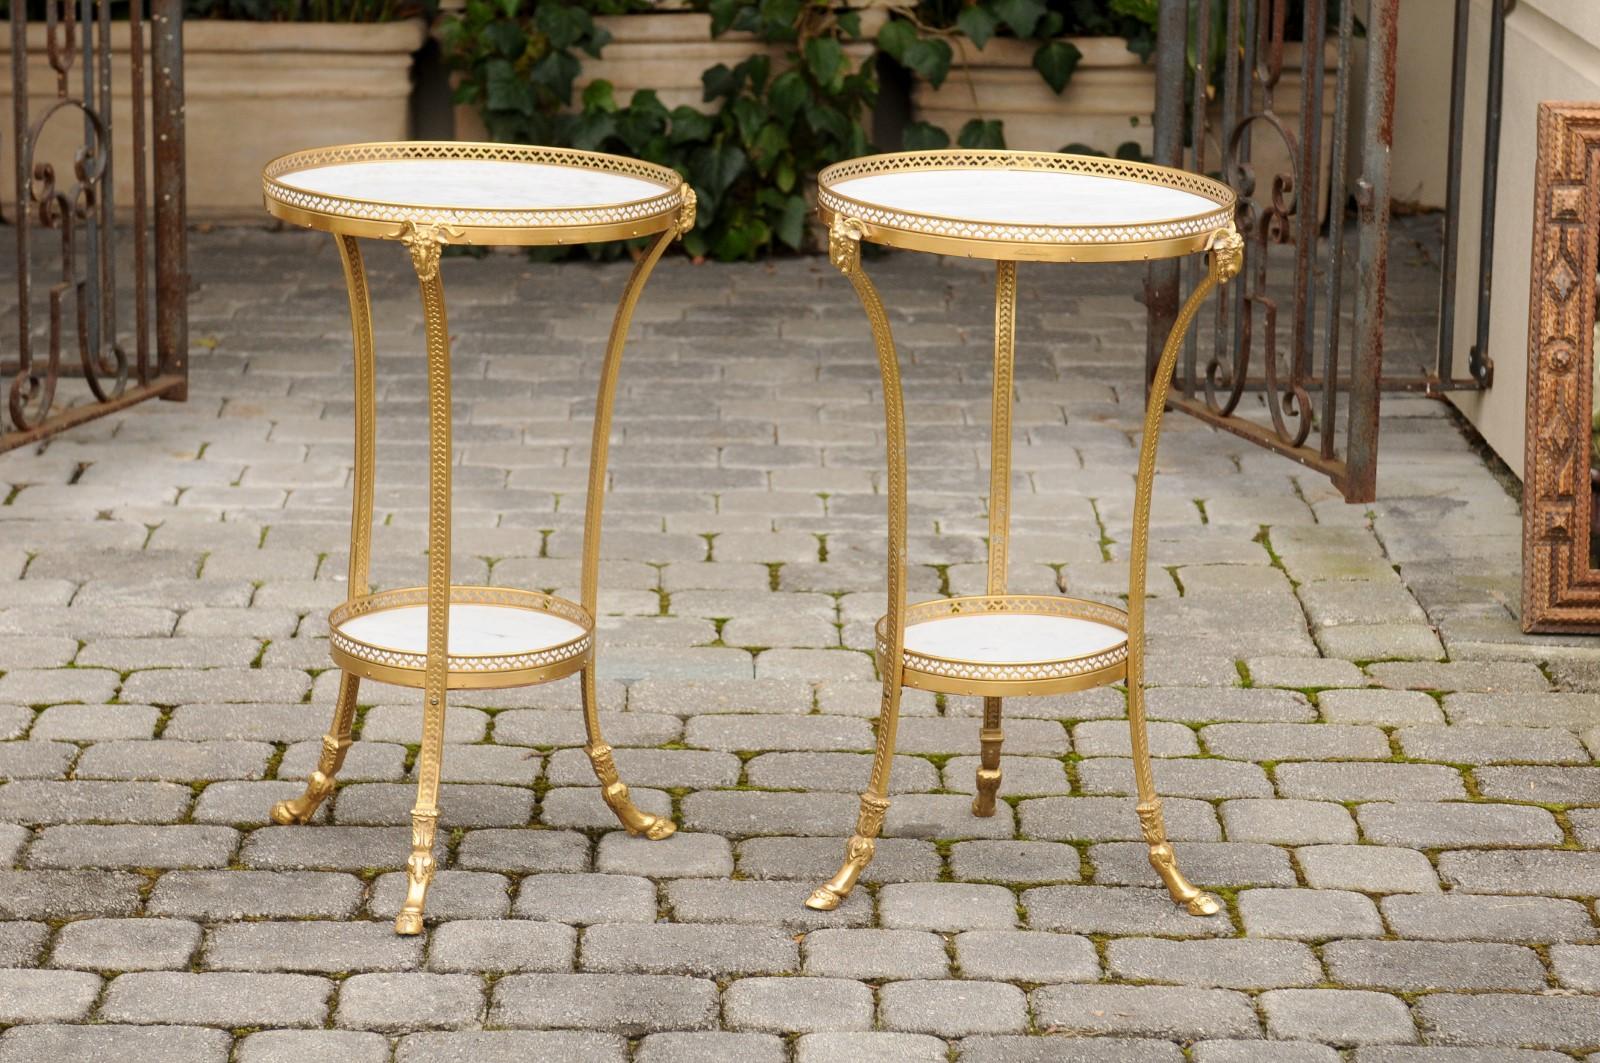 A pair of French Directoire style gilt bronze guéridon side tables from the early 20th century, with white marble tops and lower shelves, ram's heads and hoofed feet. Born in France during the Roaring Twenties, each of this pair of French guéridons